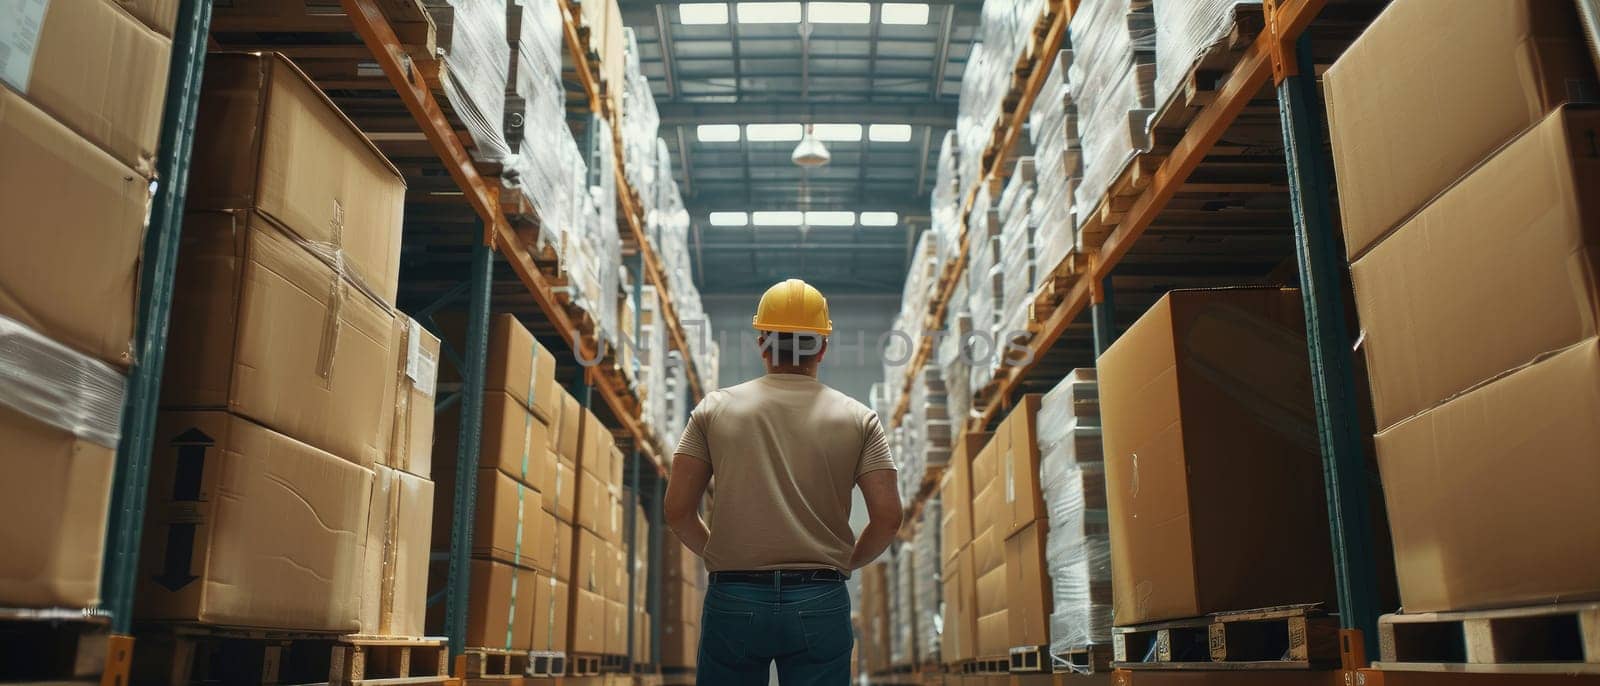 A man wearing a yellow helmet walks through a warehouse filled with boxes by AI generated image.